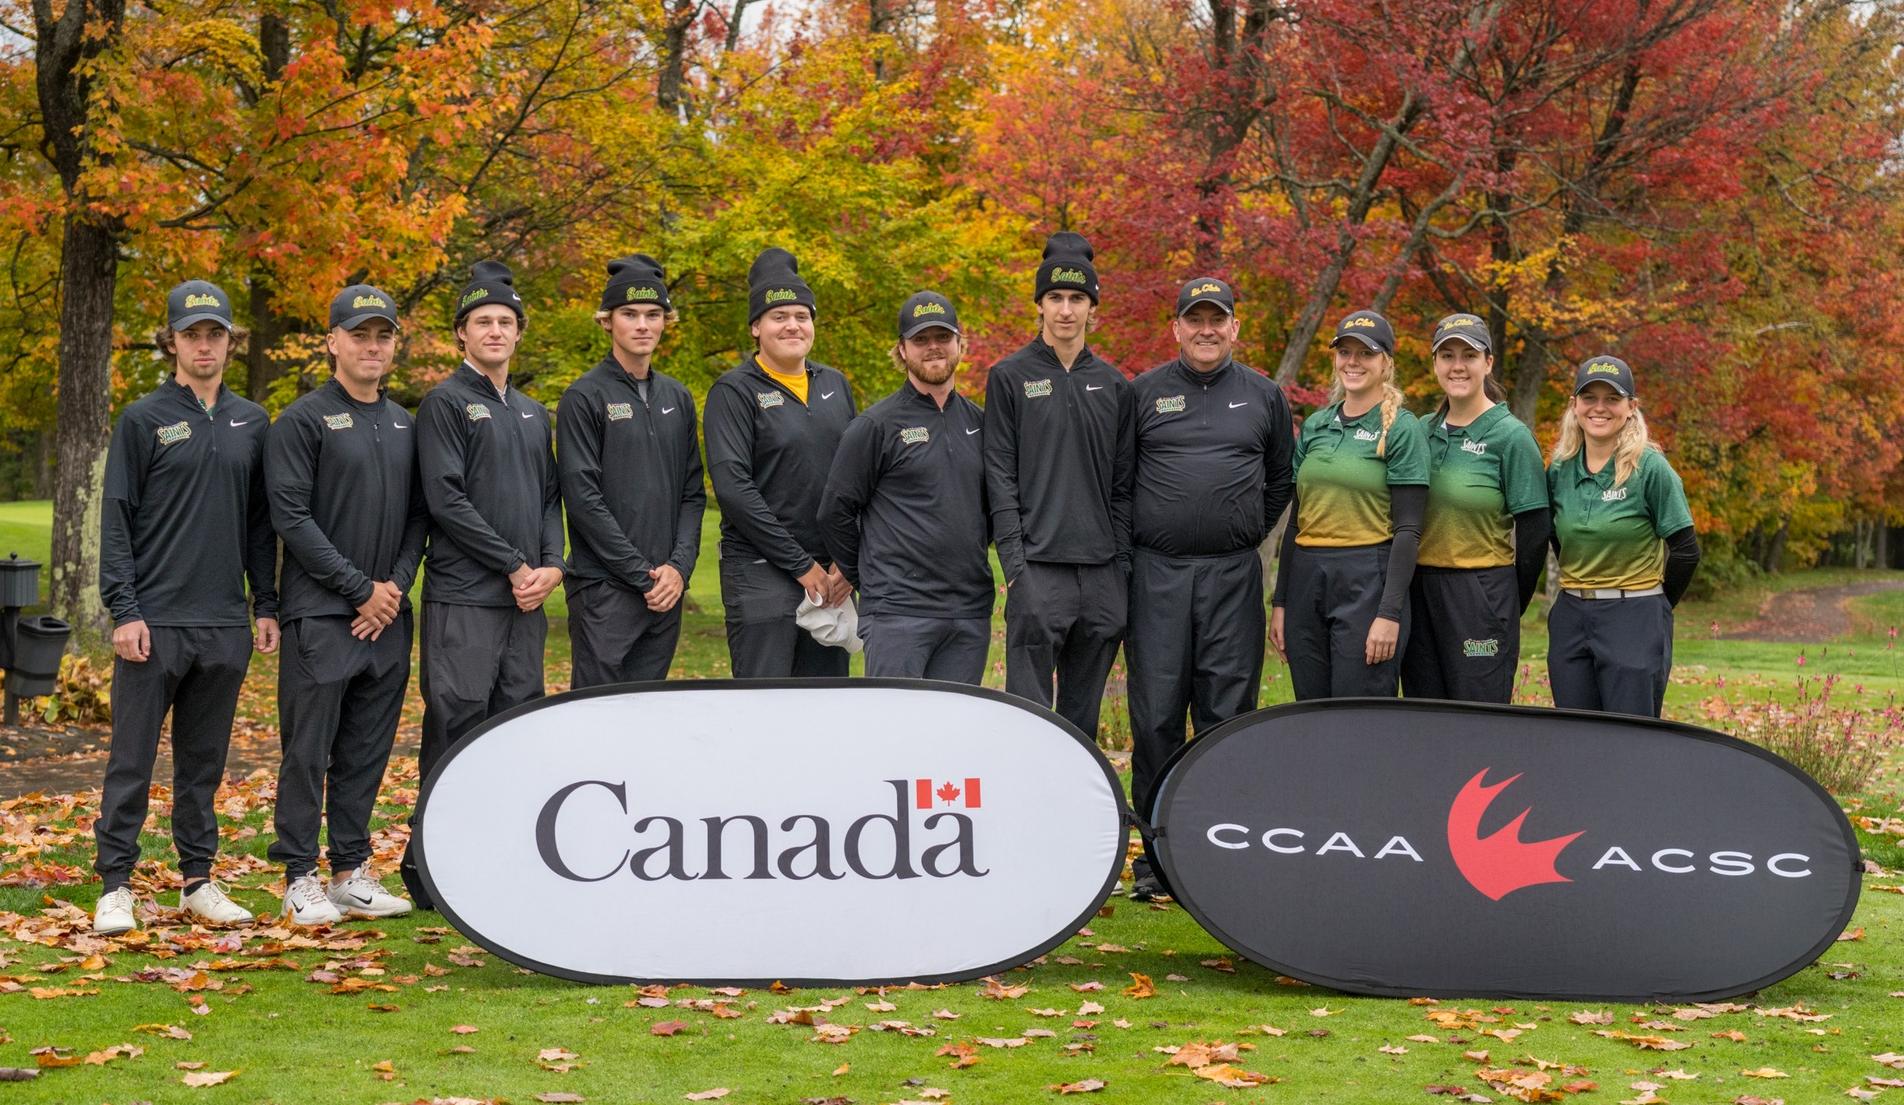 Men's Golf Teams Finished 4th in Canada